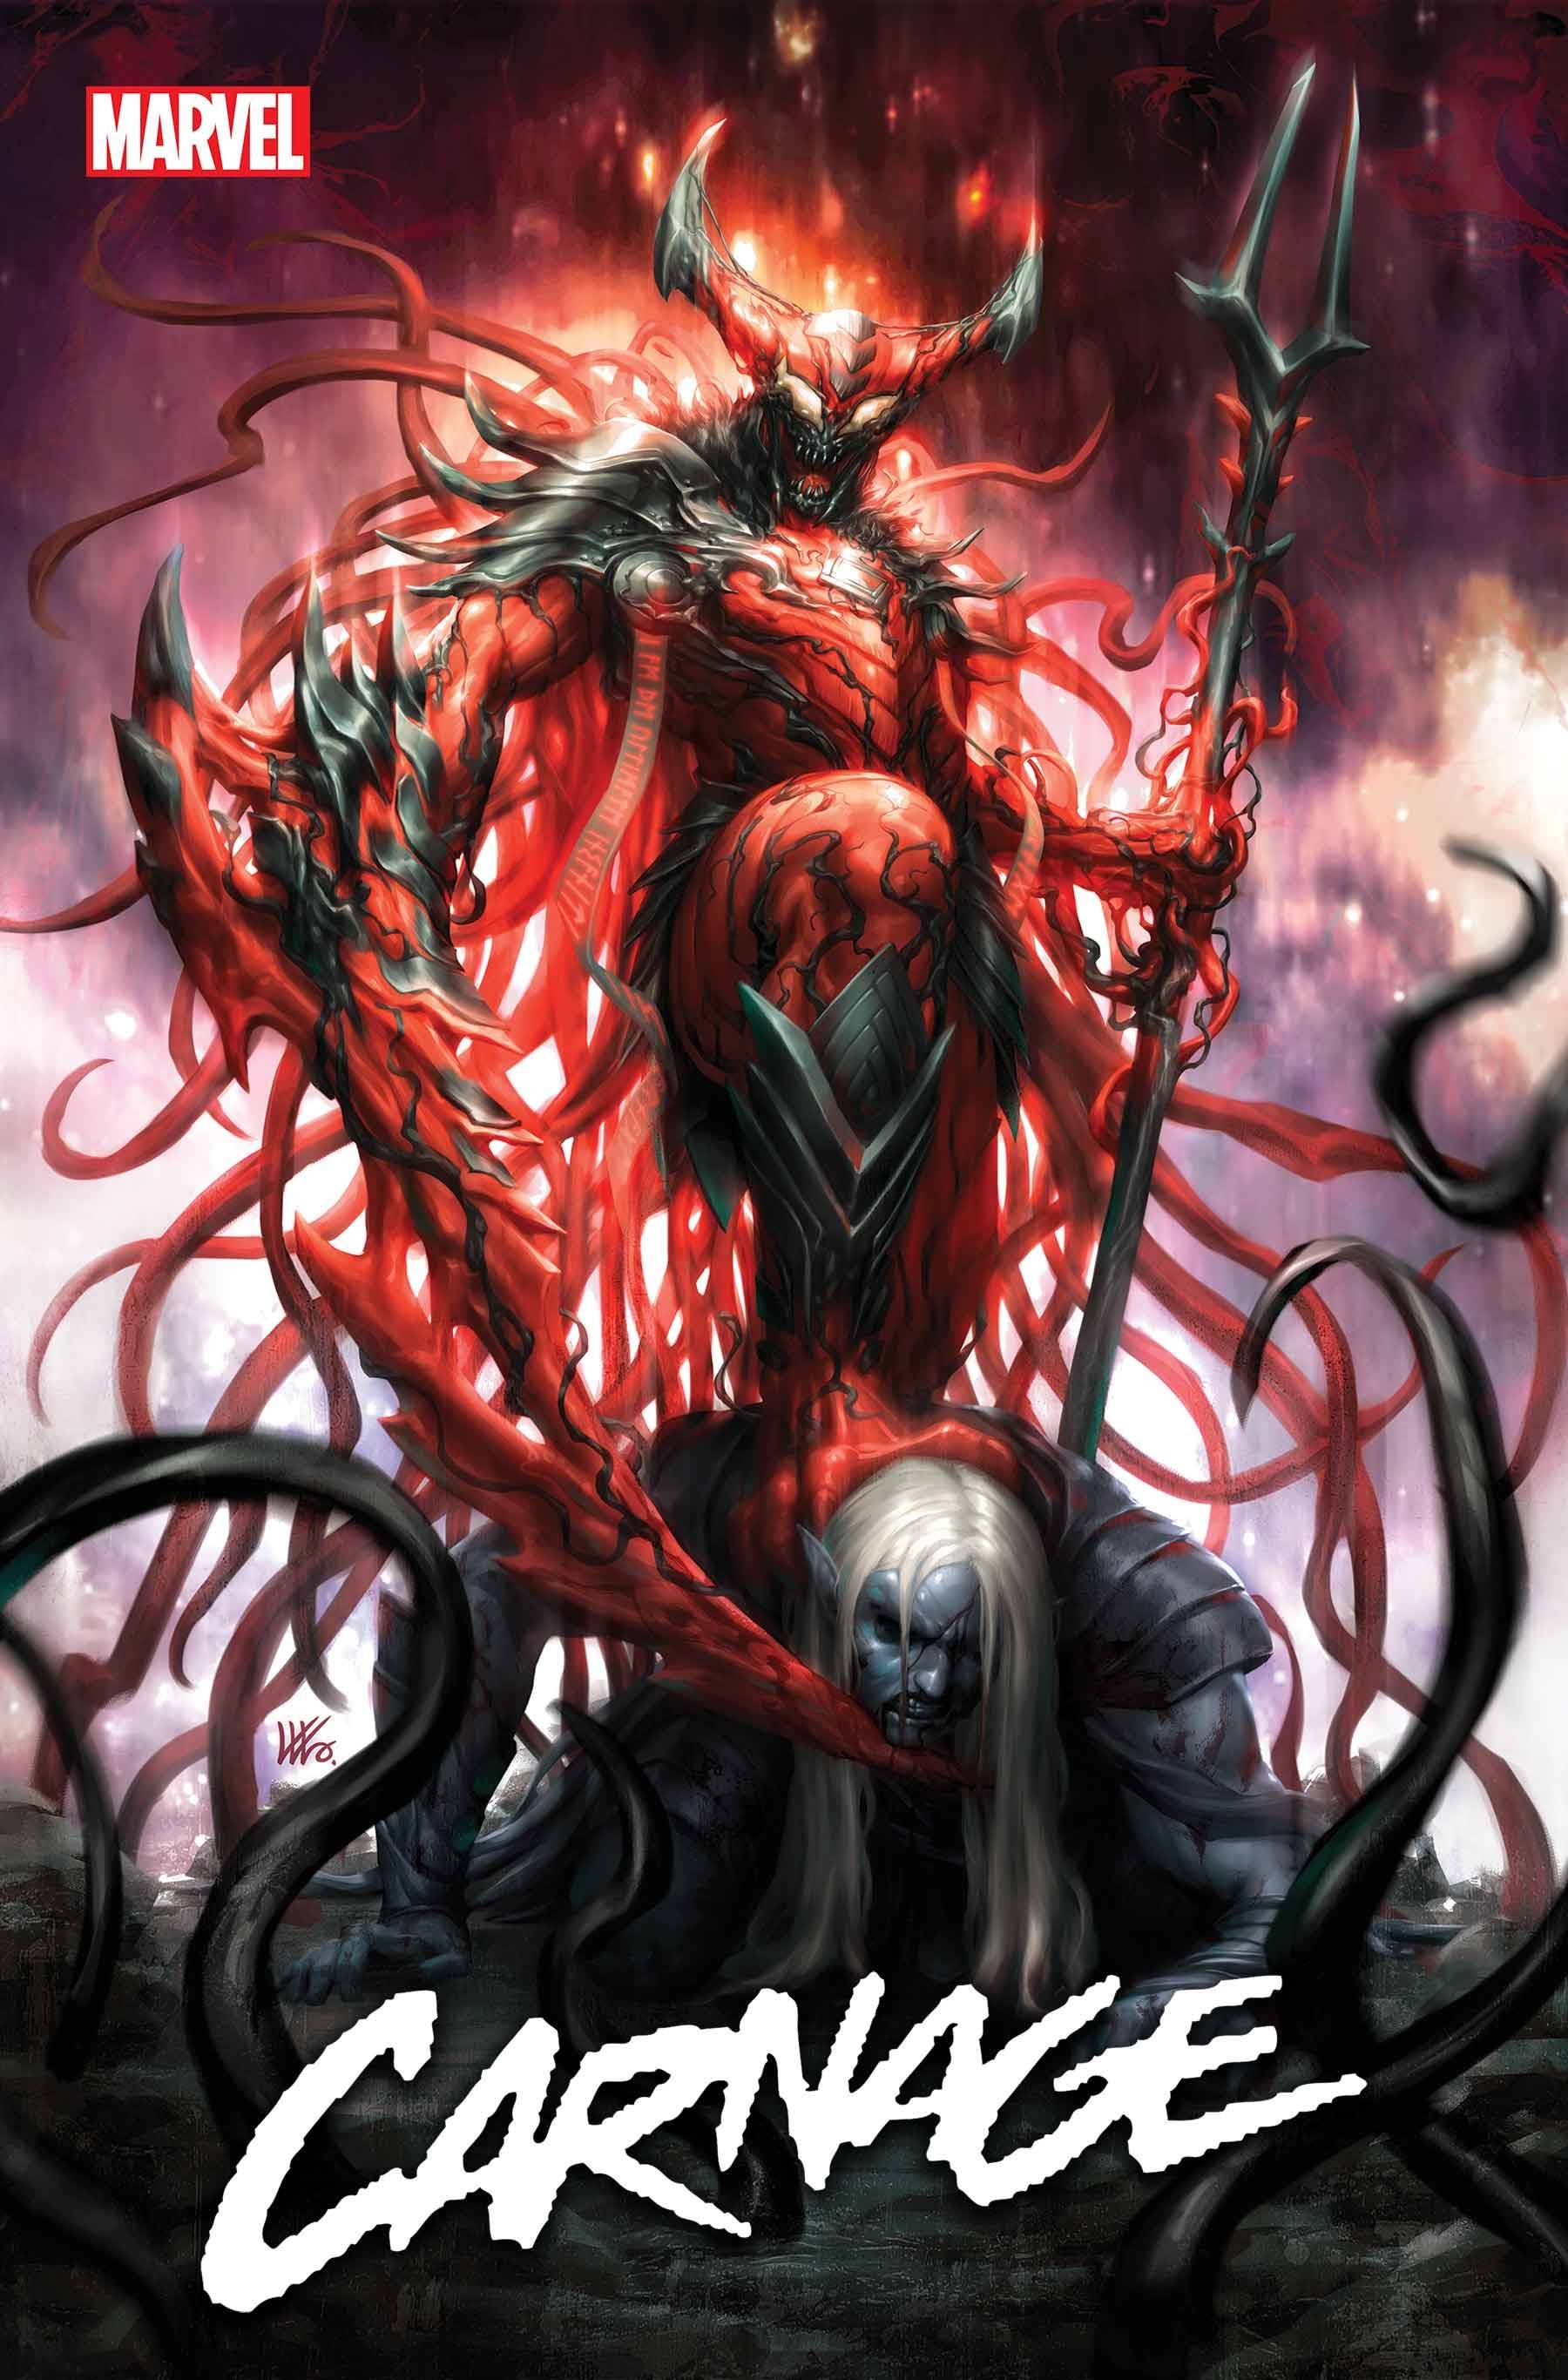 Carnage #6 (Res) - State of Comics